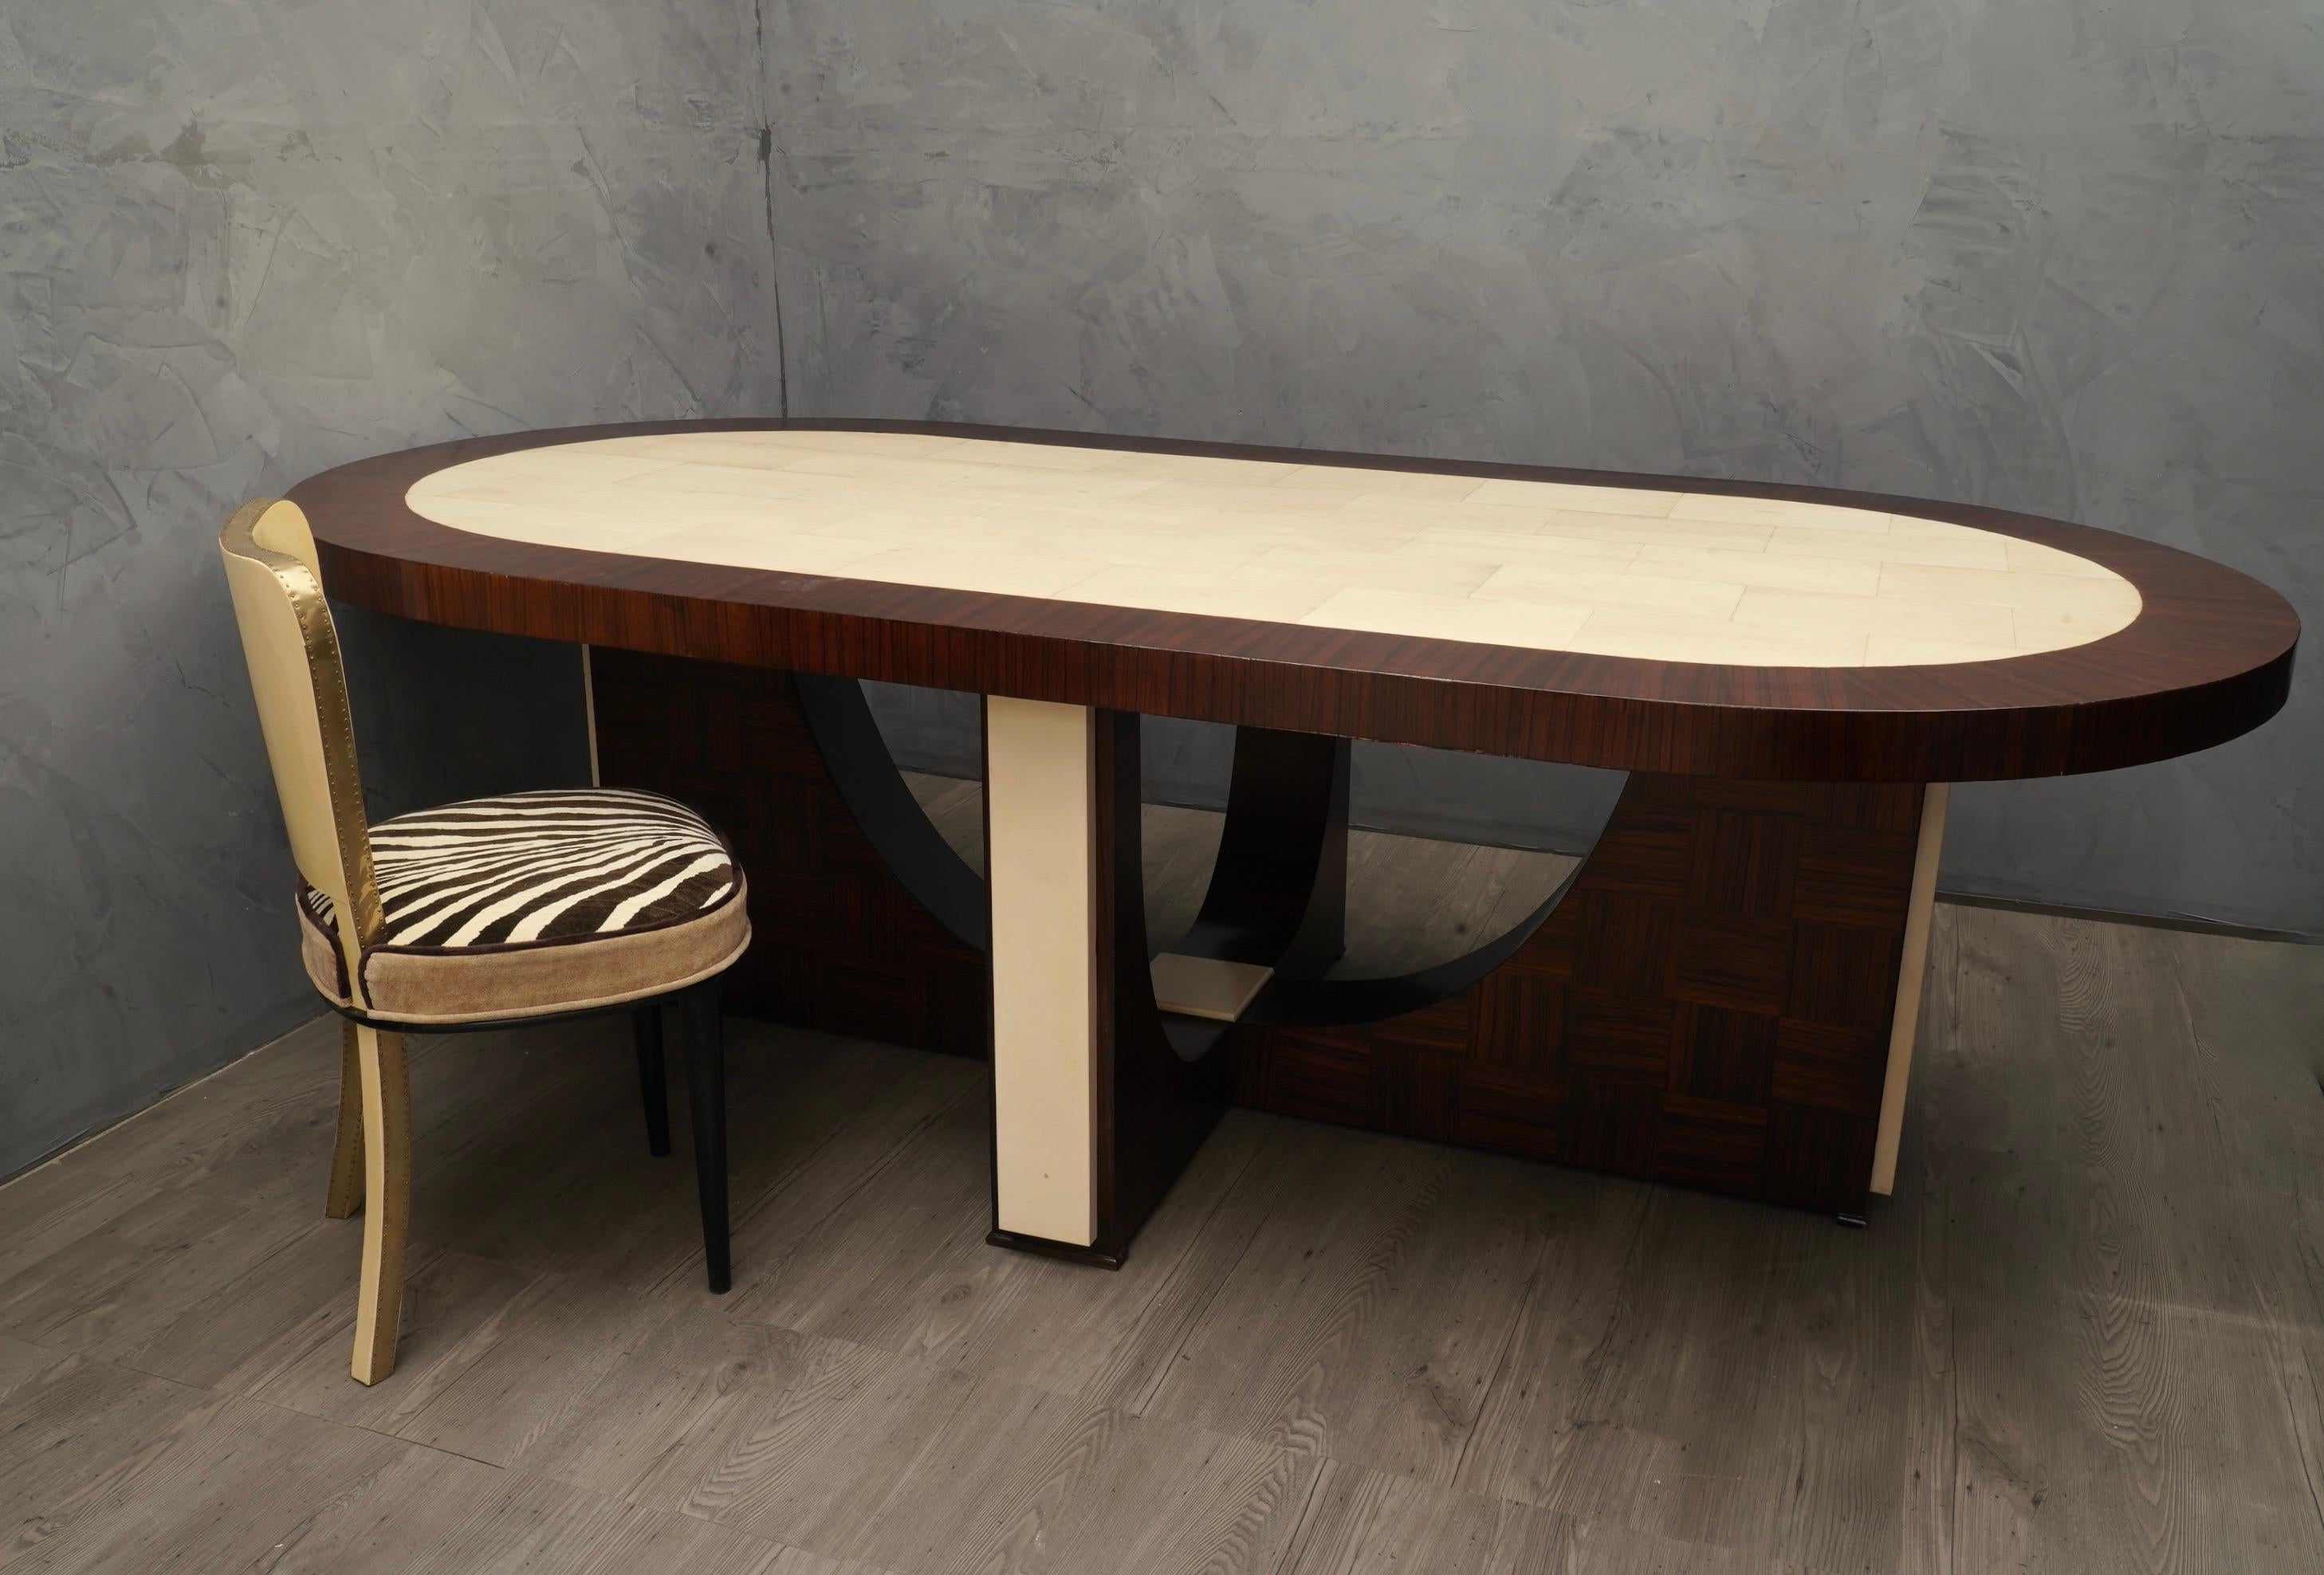 Clean lines and absolutely original shape for the leg with a very large tabletop, perfect for meetings in the office or in the family.

The tabletop is formed by a large zebrano wood veneered frame, with a goatskin covering in the center. Beautiful